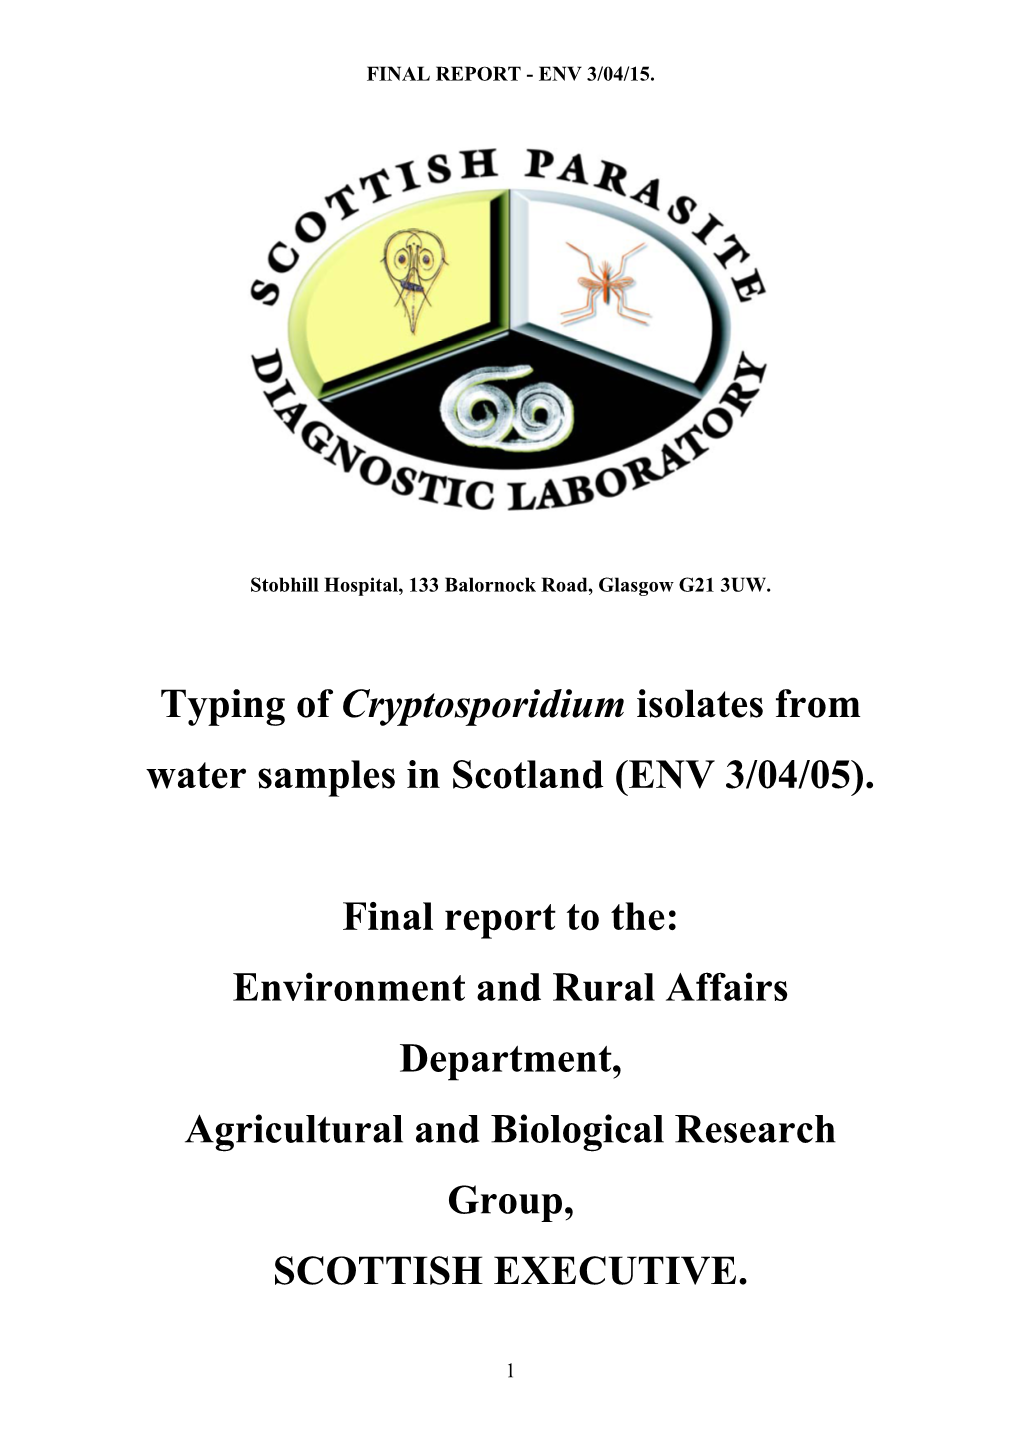 Typing of Cryptosporidium Isolates from Water Samples in Scotland (ENV 3/04/05)